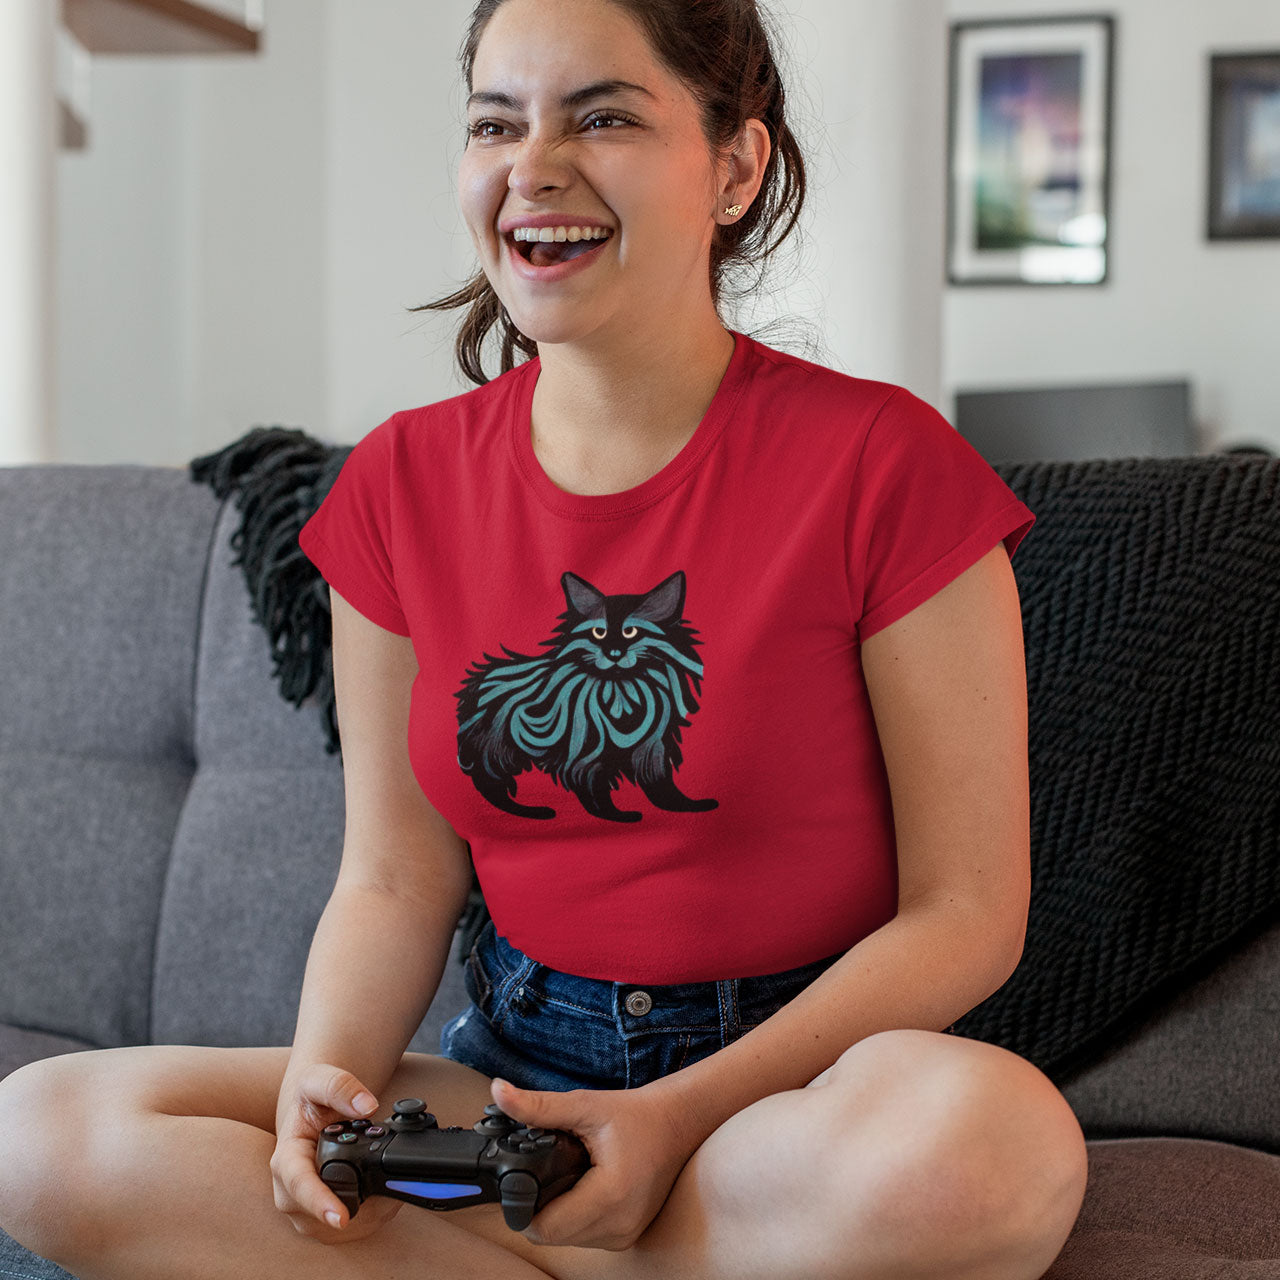 Girl on a couch playing playstation wearing a red t-shirt with a Maine Coon cat print